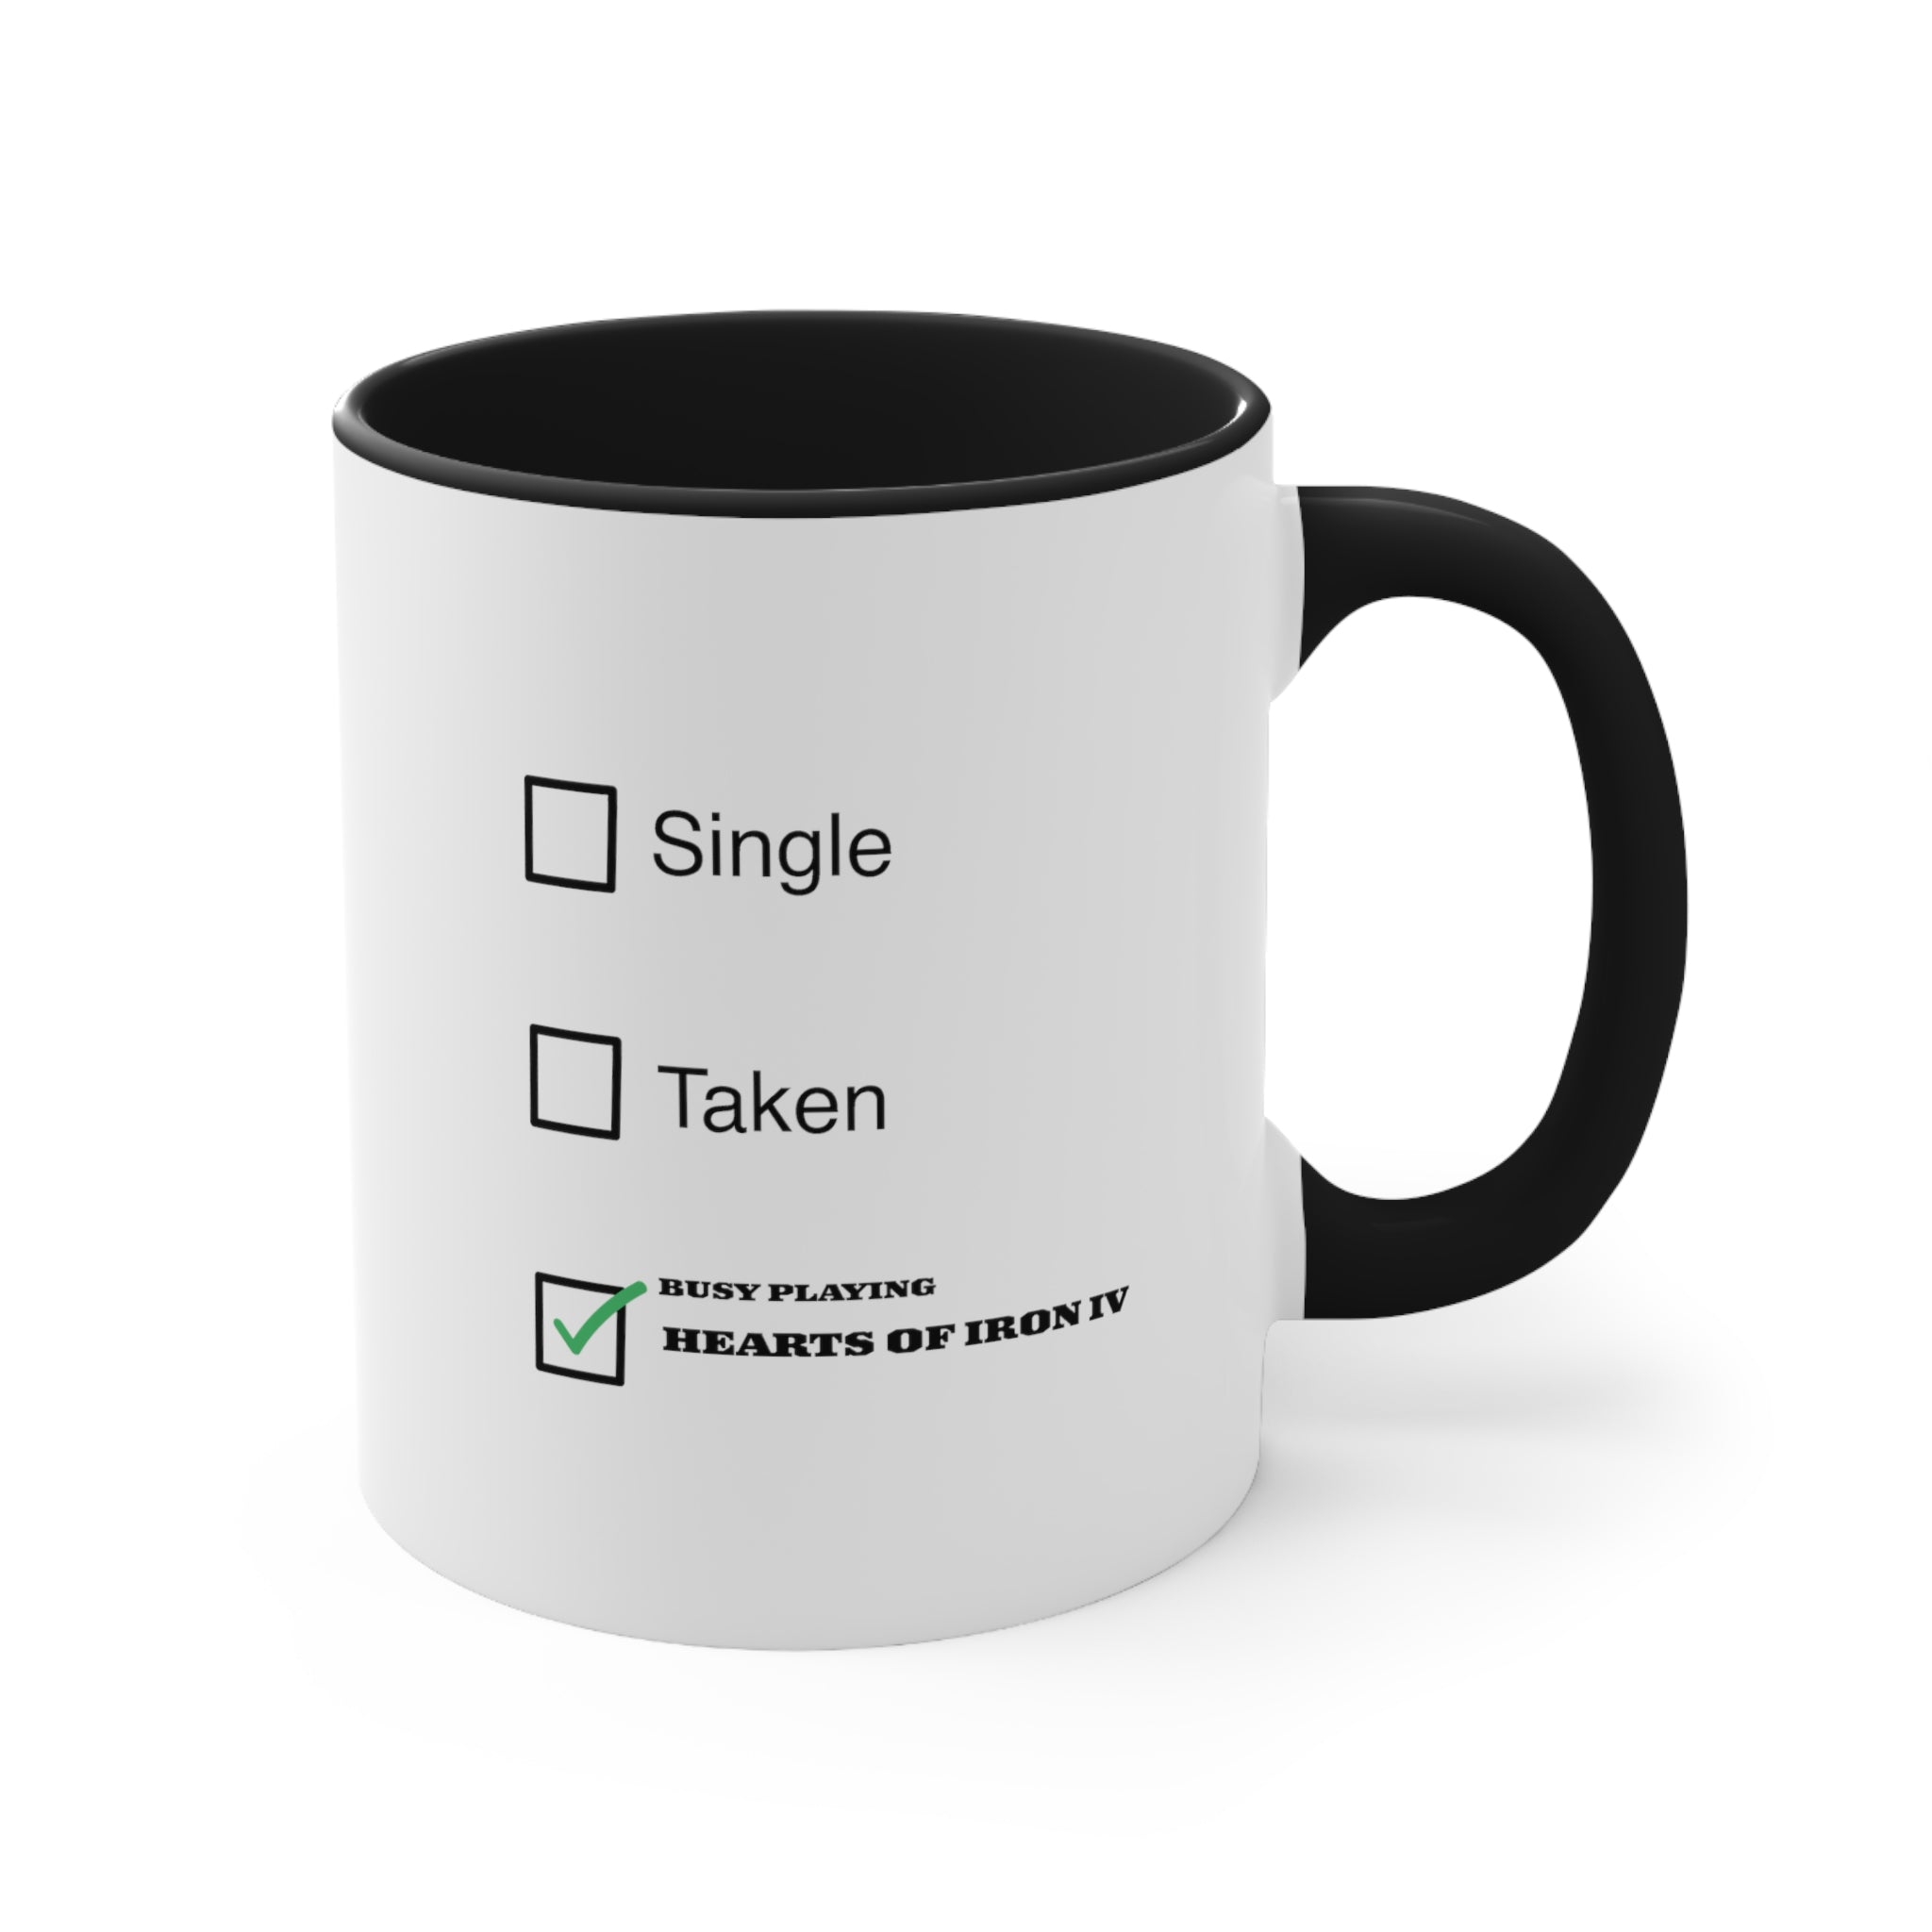 Hearts Of Iron IV 4 Funny Coffee Mug, 11oz Single Taken Cups Mugs Cup Gamer Gift For Him Her Game Cup Cups Mugs Birthday Christmas Valentine's Anniversary Gifts